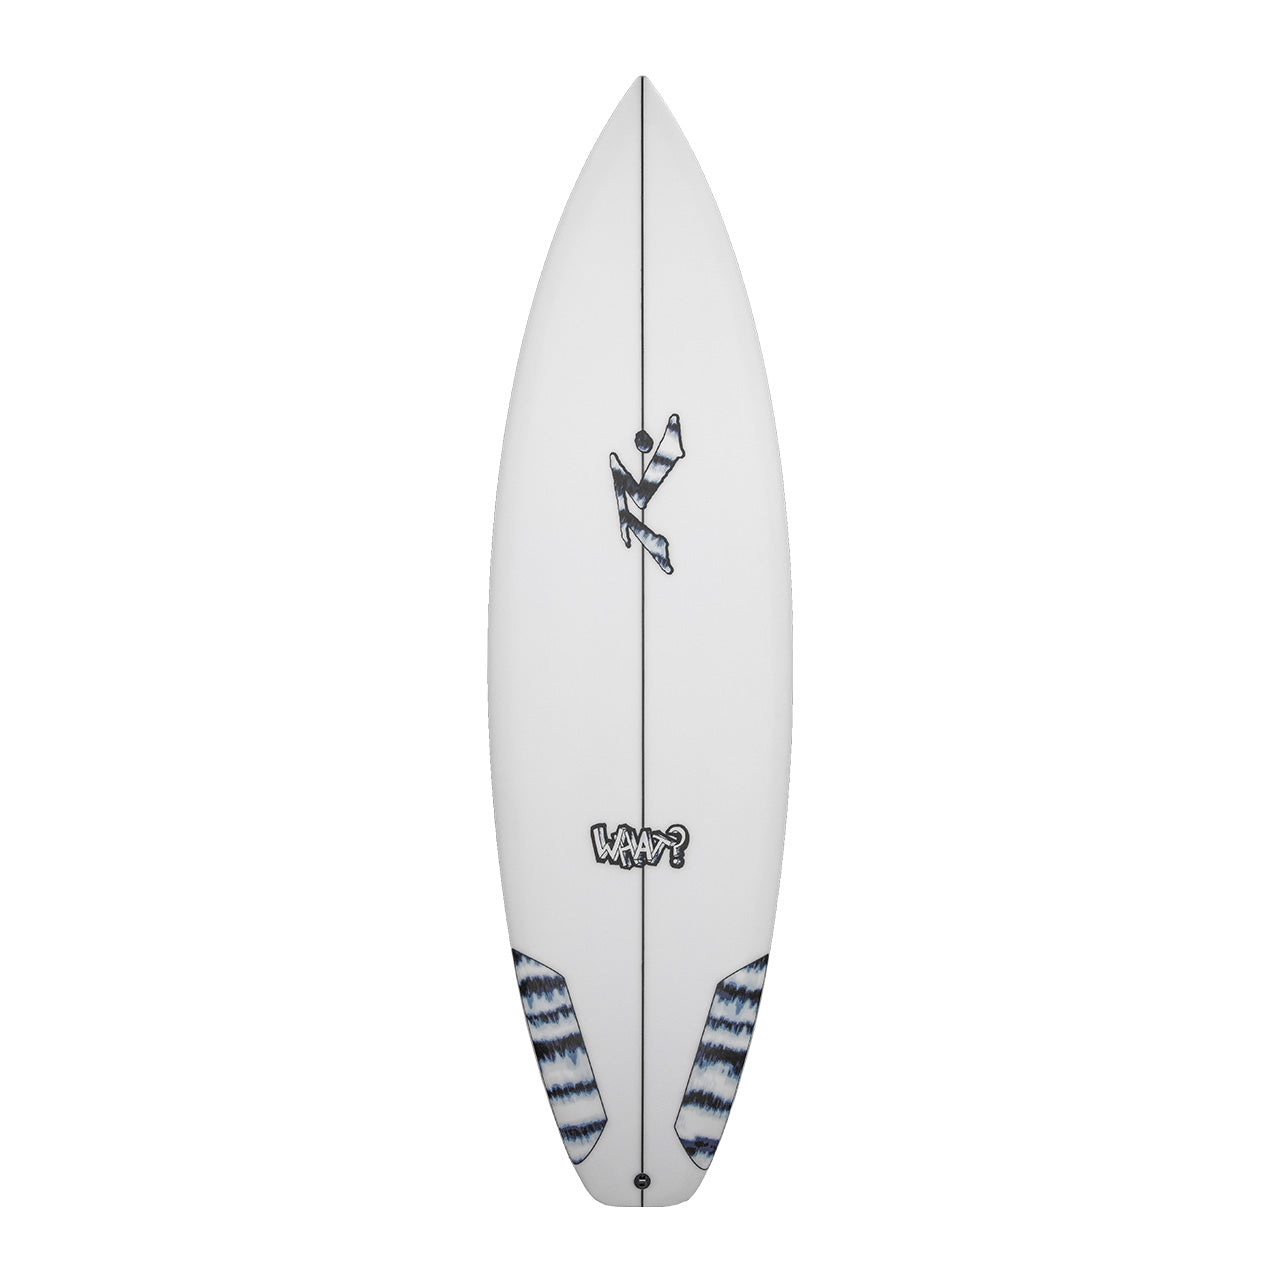 The What - High Performance Shortboard - Rusty Surfboards - Top View